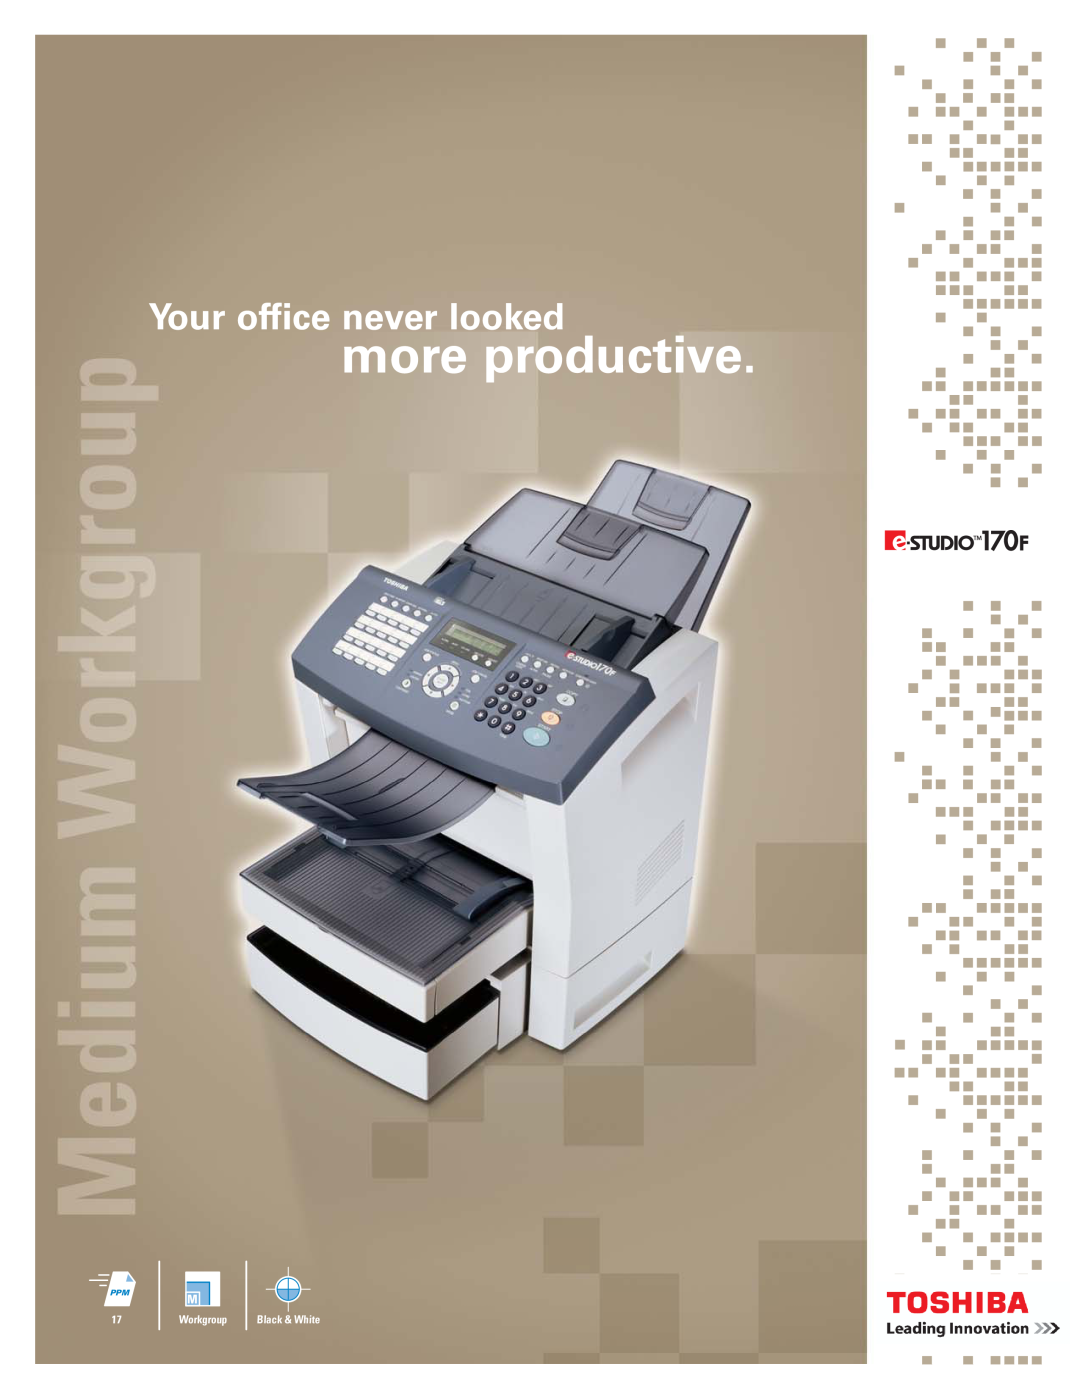 Toshiba Workgroup17 manual Your office never looked, more productive, Black & White 